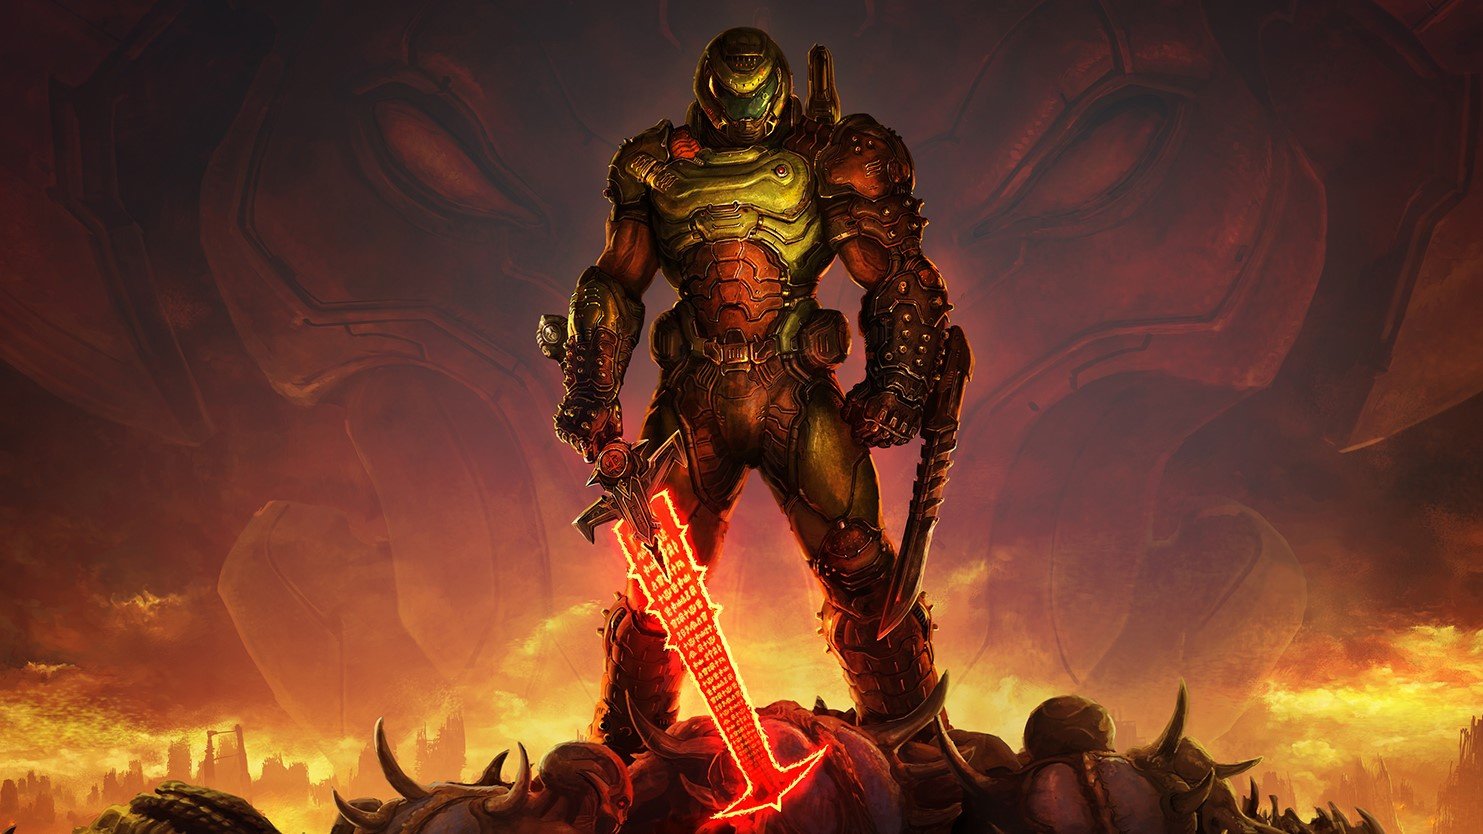 is doom eternal coming to switch